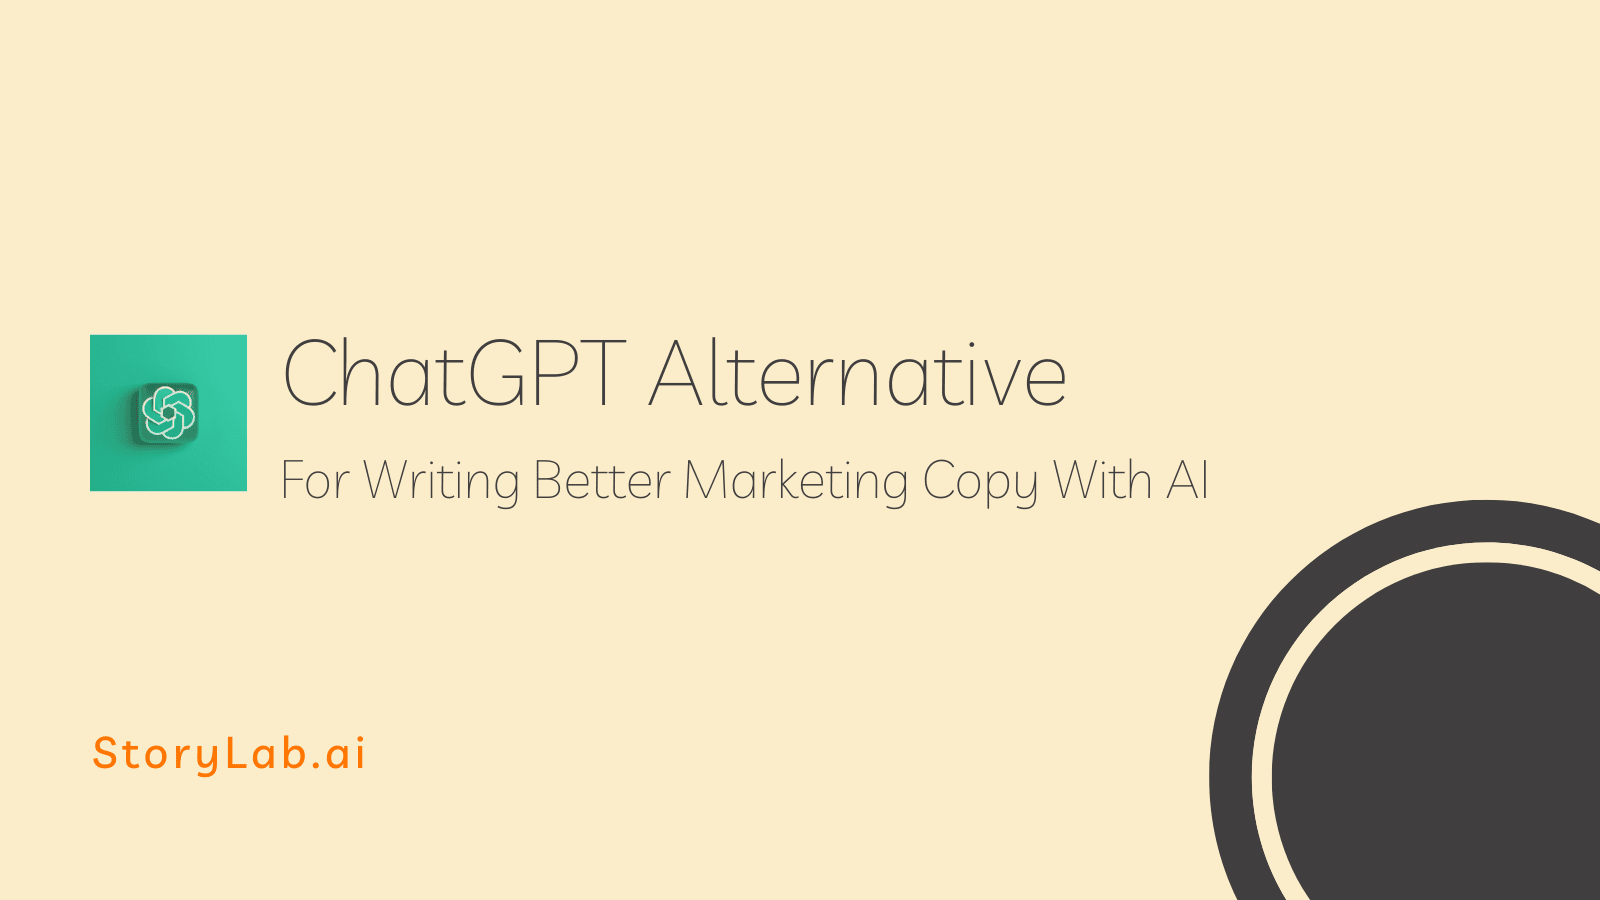 ChatGPT Alternative For Writing Better Marketing Copy With AI